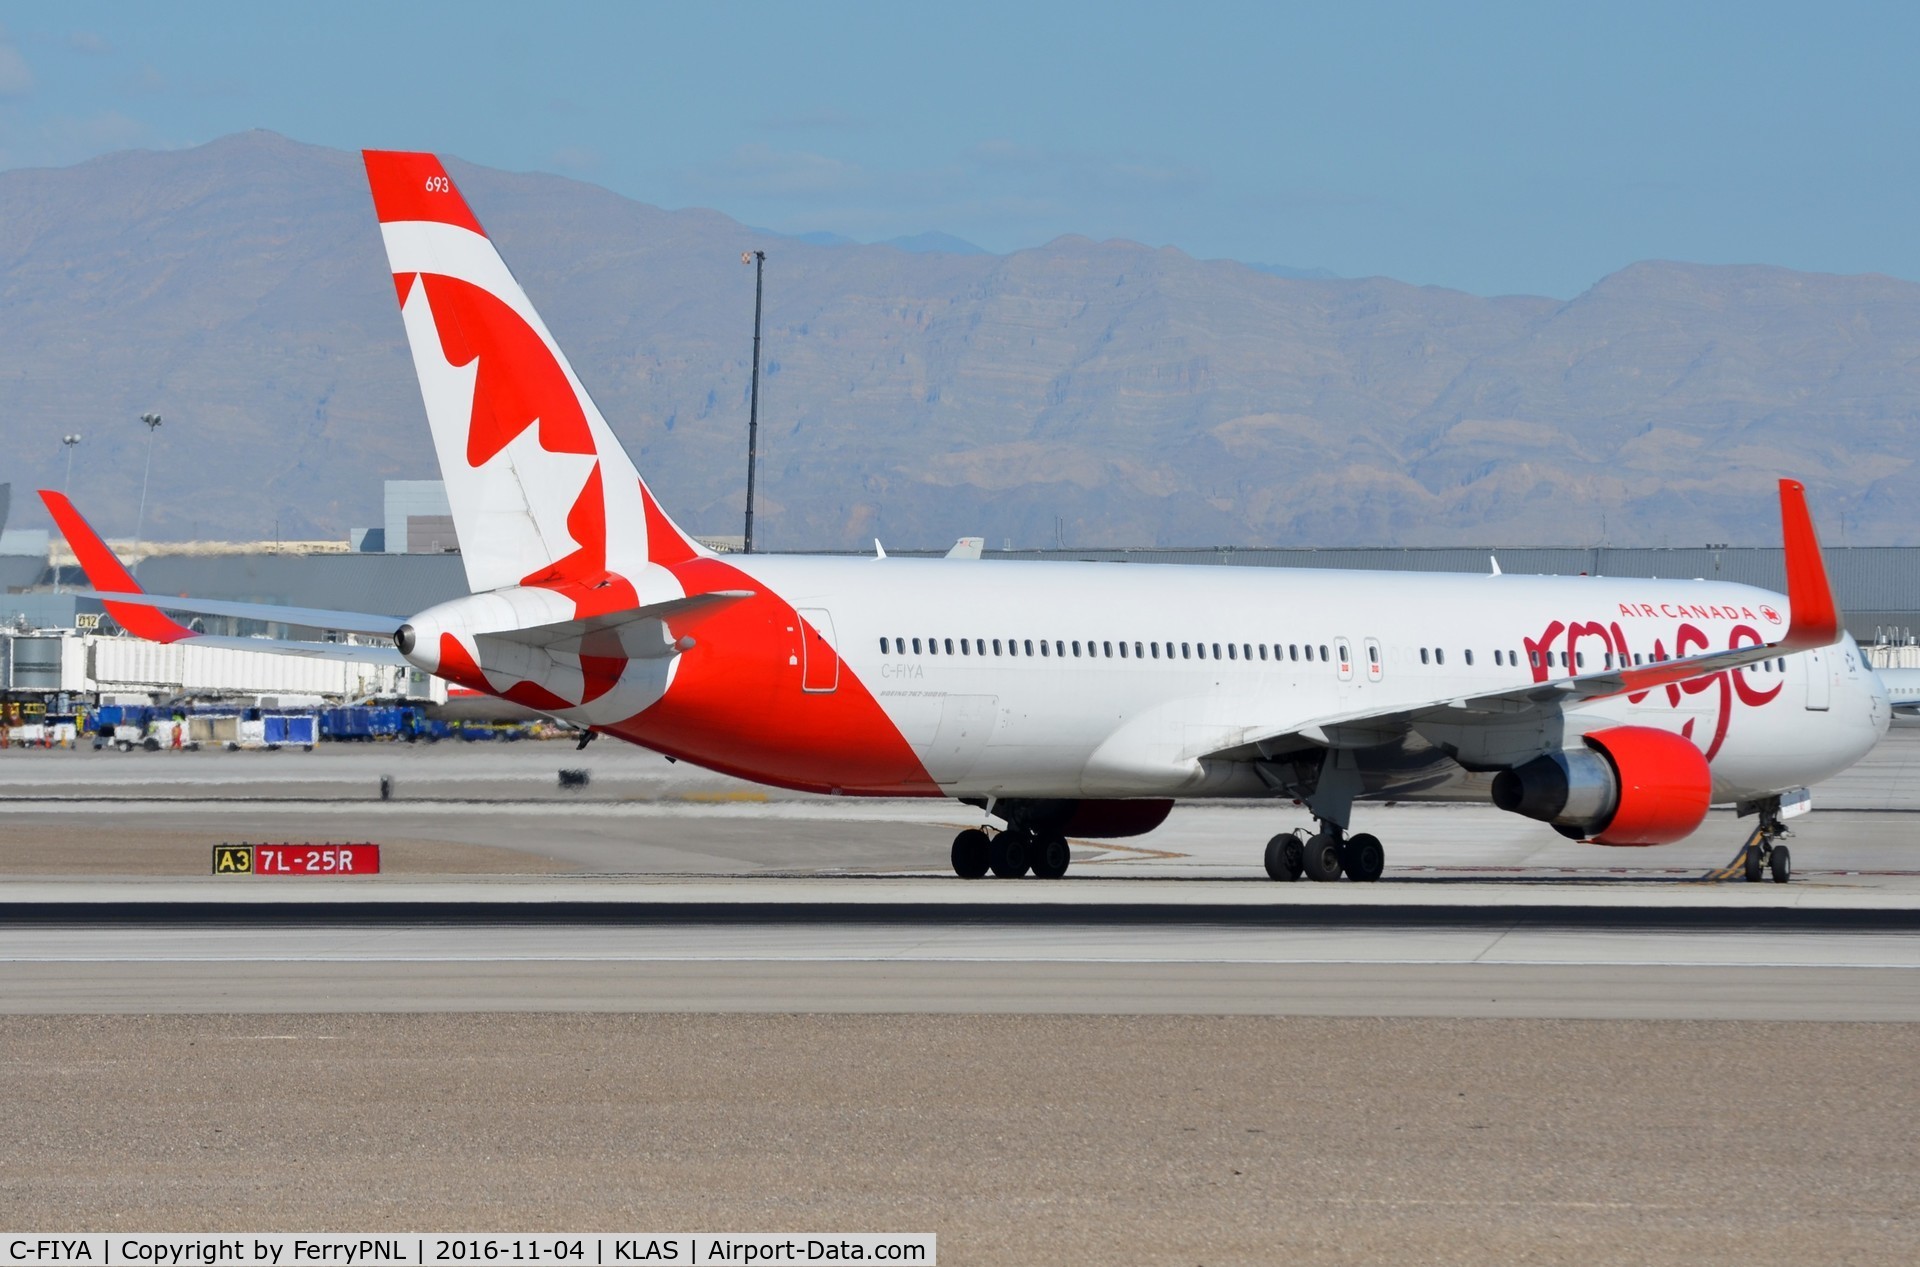 C-FIYA, 2002 Boeing 767-33A C/N 33421, Rouge B763 about to cross the runway.